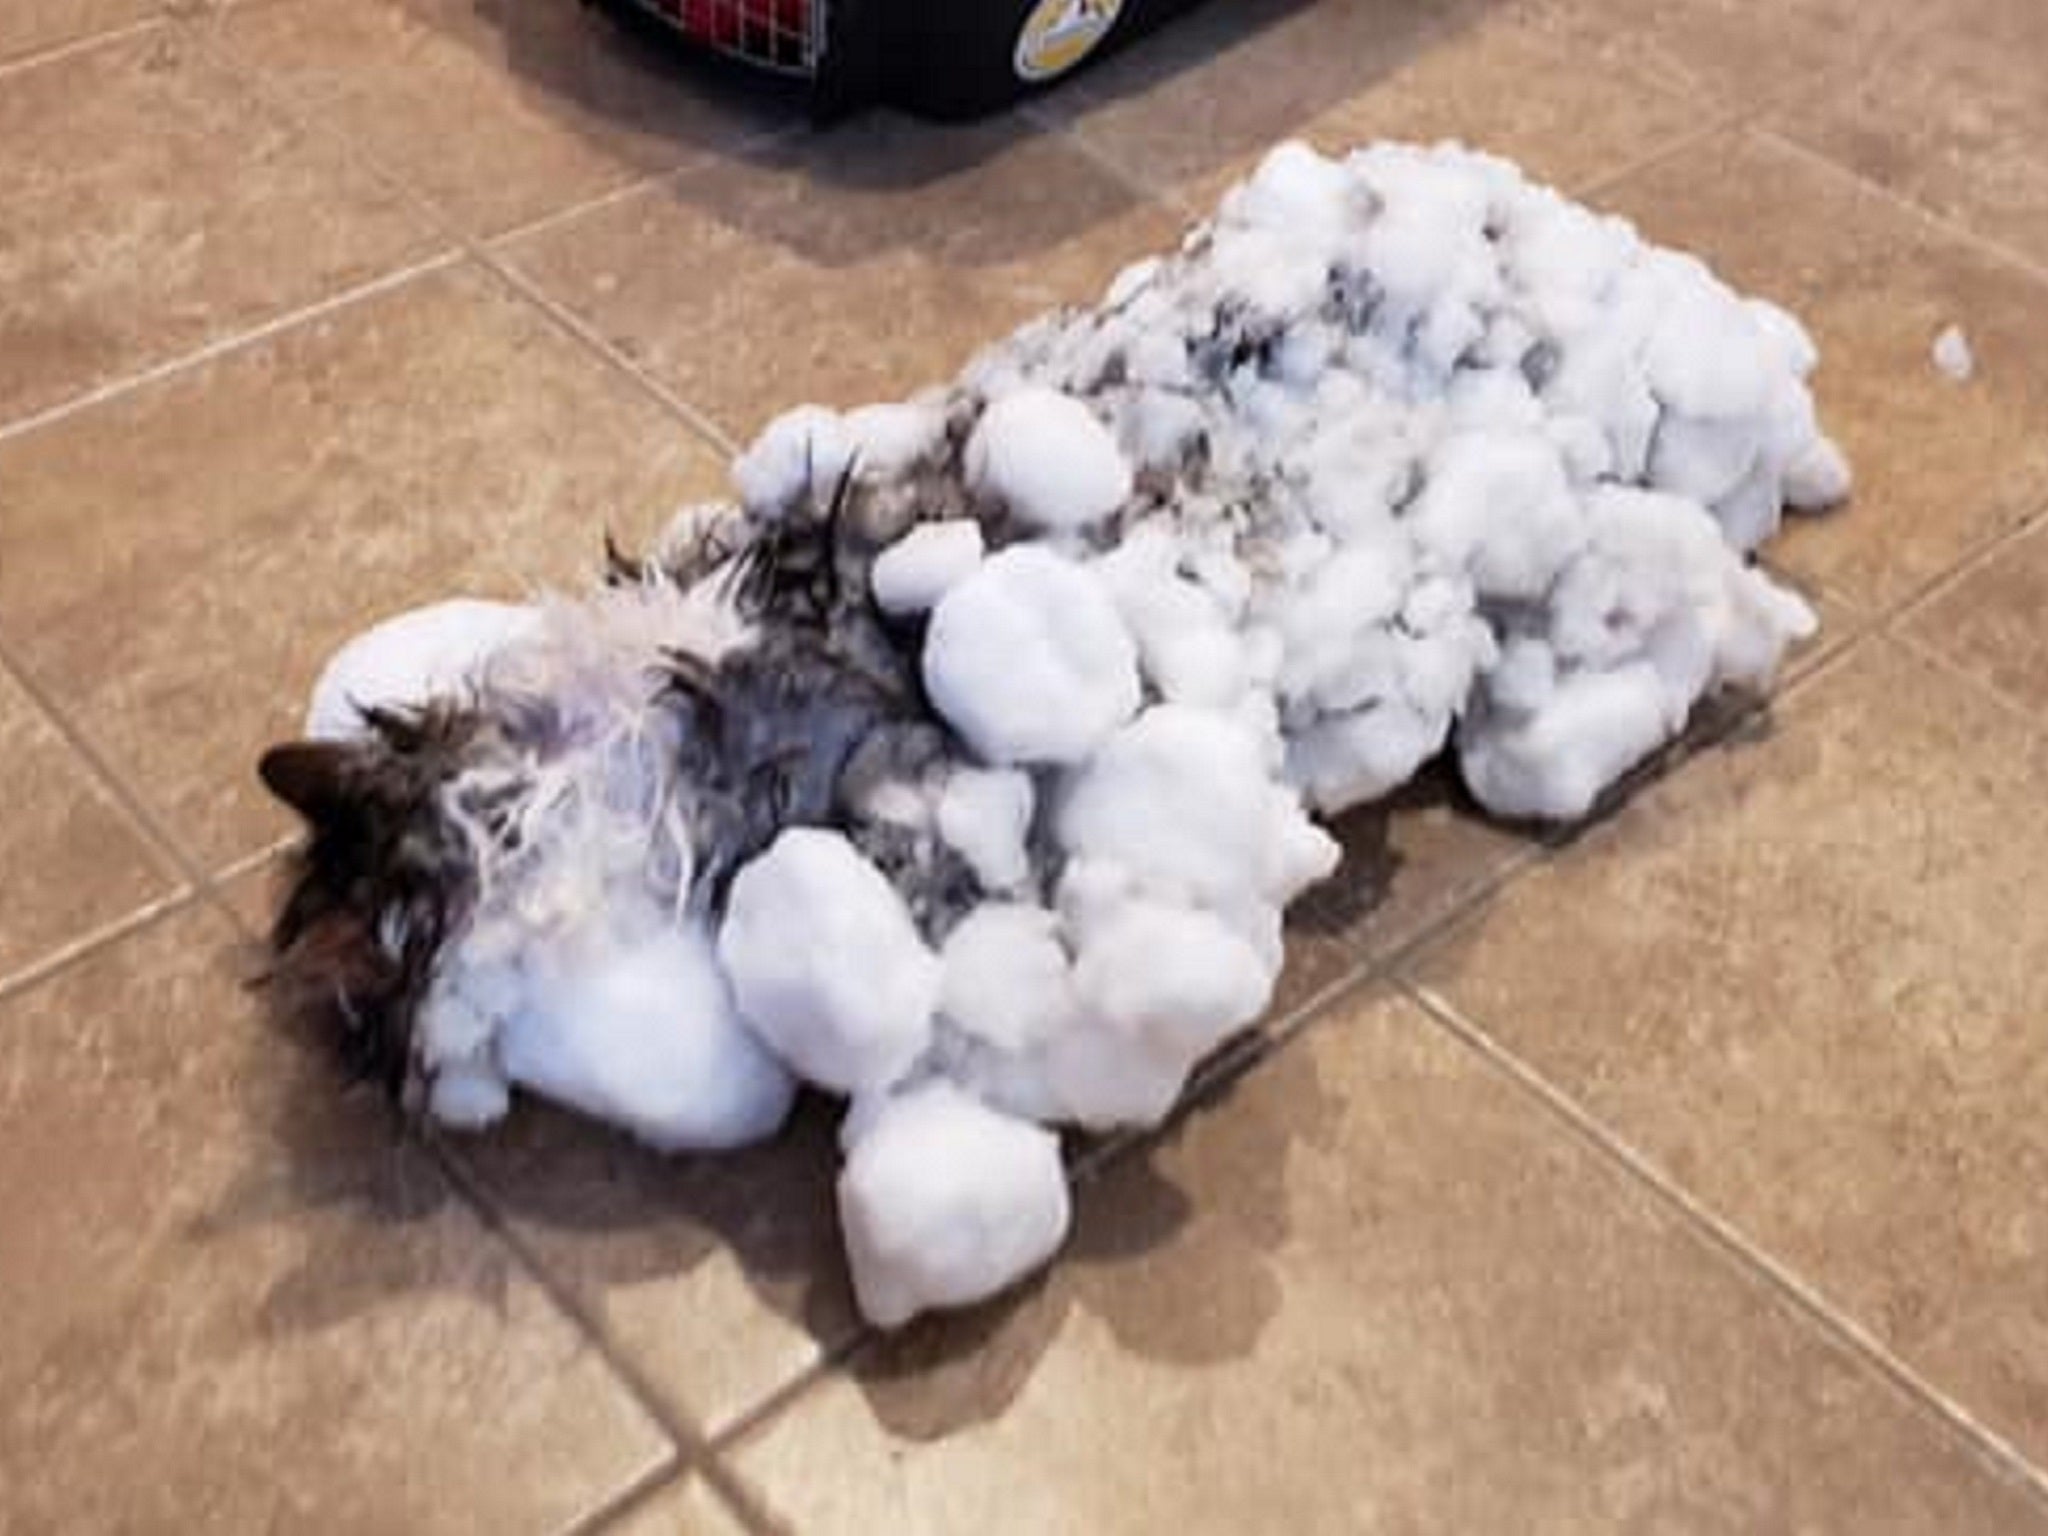 Fluffy the cat had a miraculous recovery after she was found frozen and unresponsive after being buried in snow in Kalispell, Montana, on 31 January 2019.